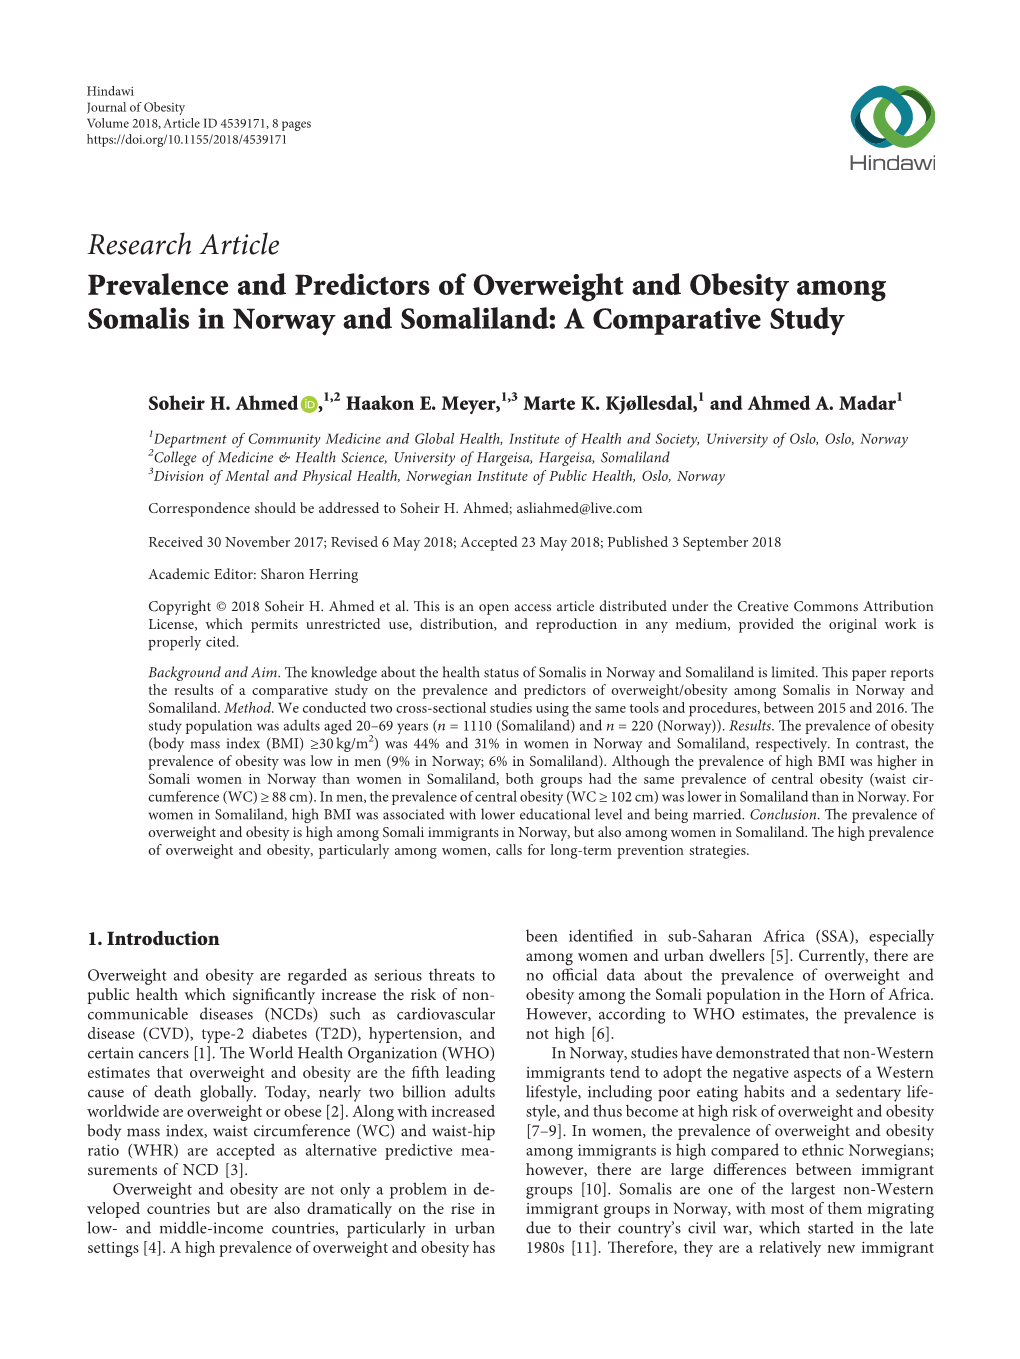 Prevalence and Predictors of Overweight and Obesity Among Somalis in Norway and Somaliland: a Comparative Study